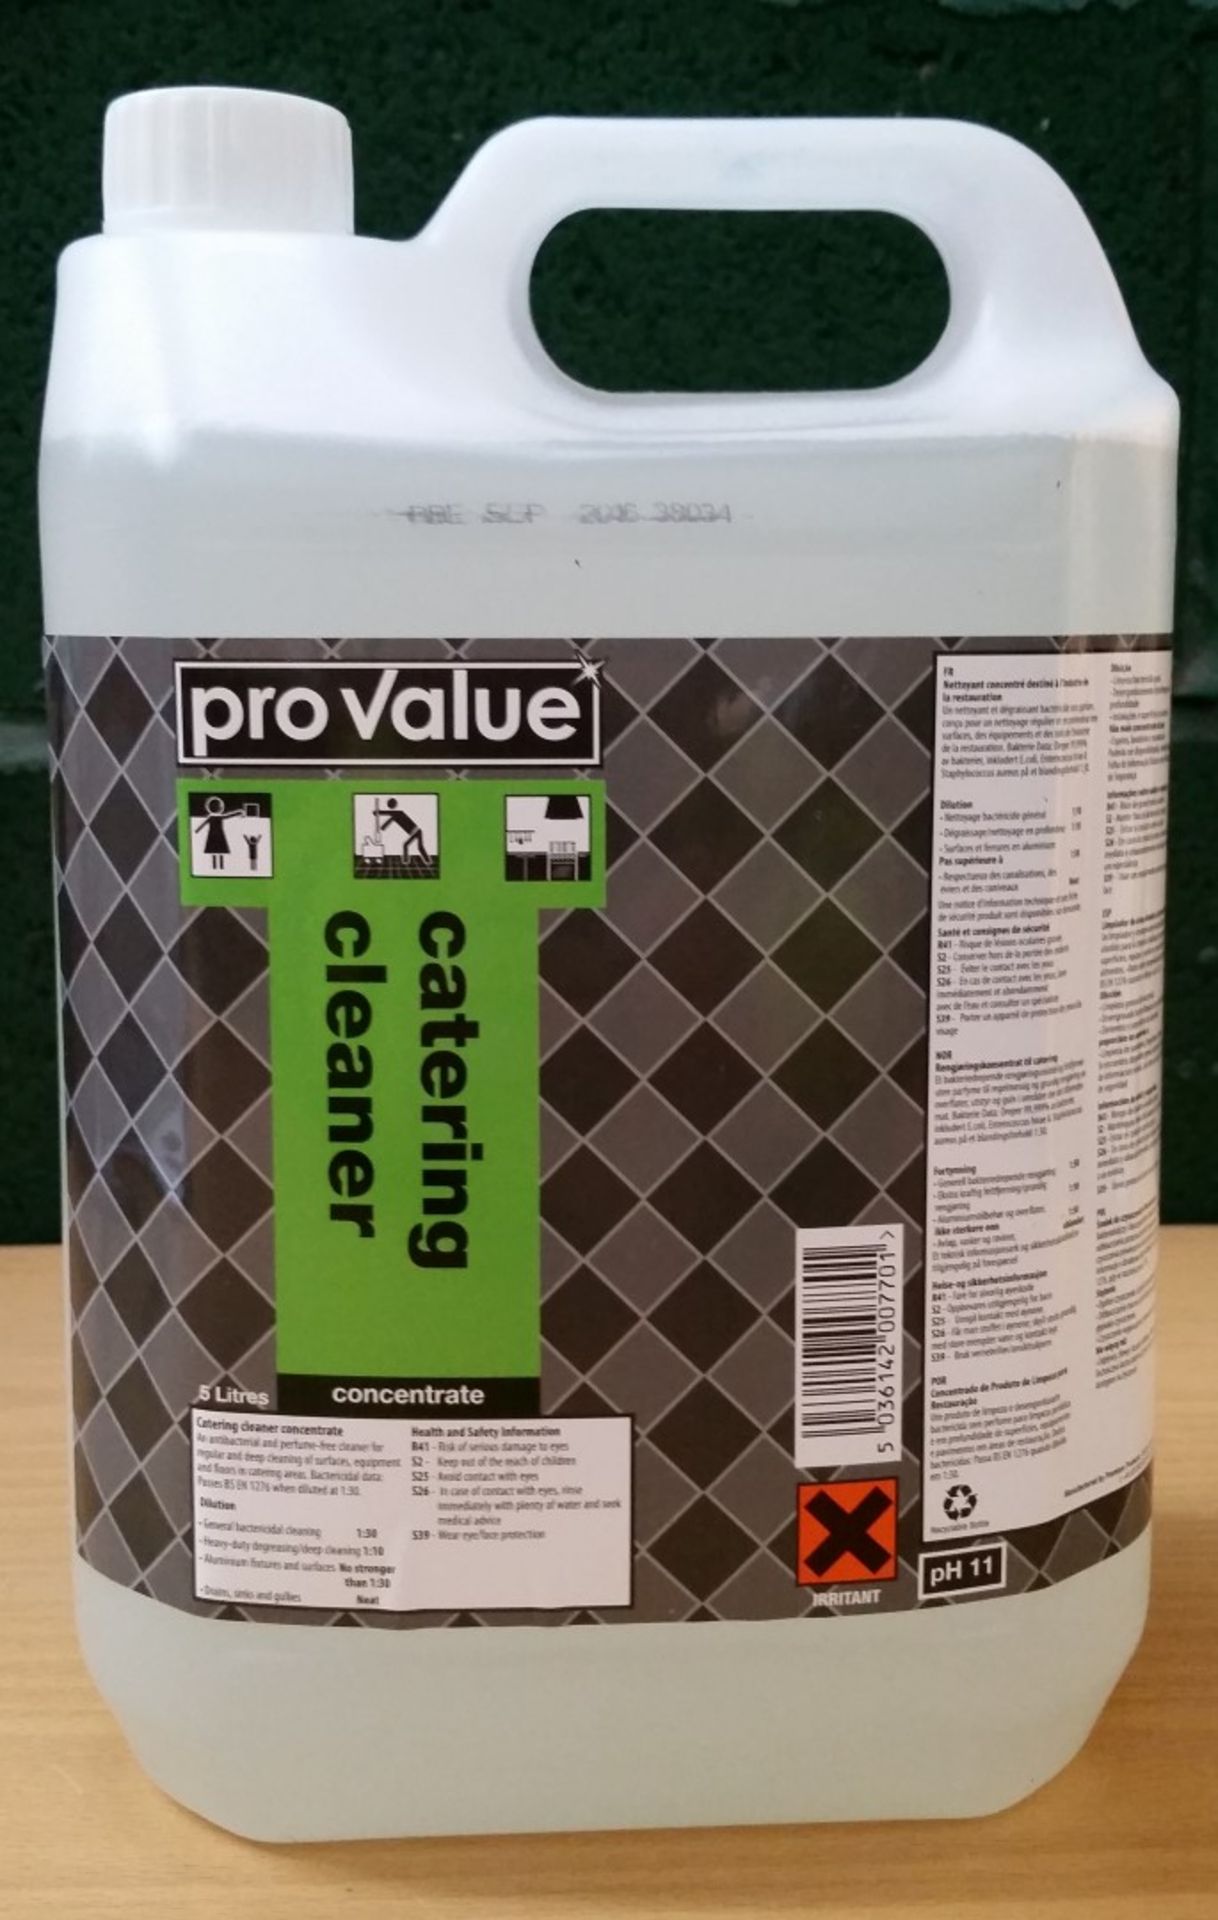 10 x Pro Value 5 Litre Catering Cleaner - Best Before September 2016 - New Boxed Stock - Includes